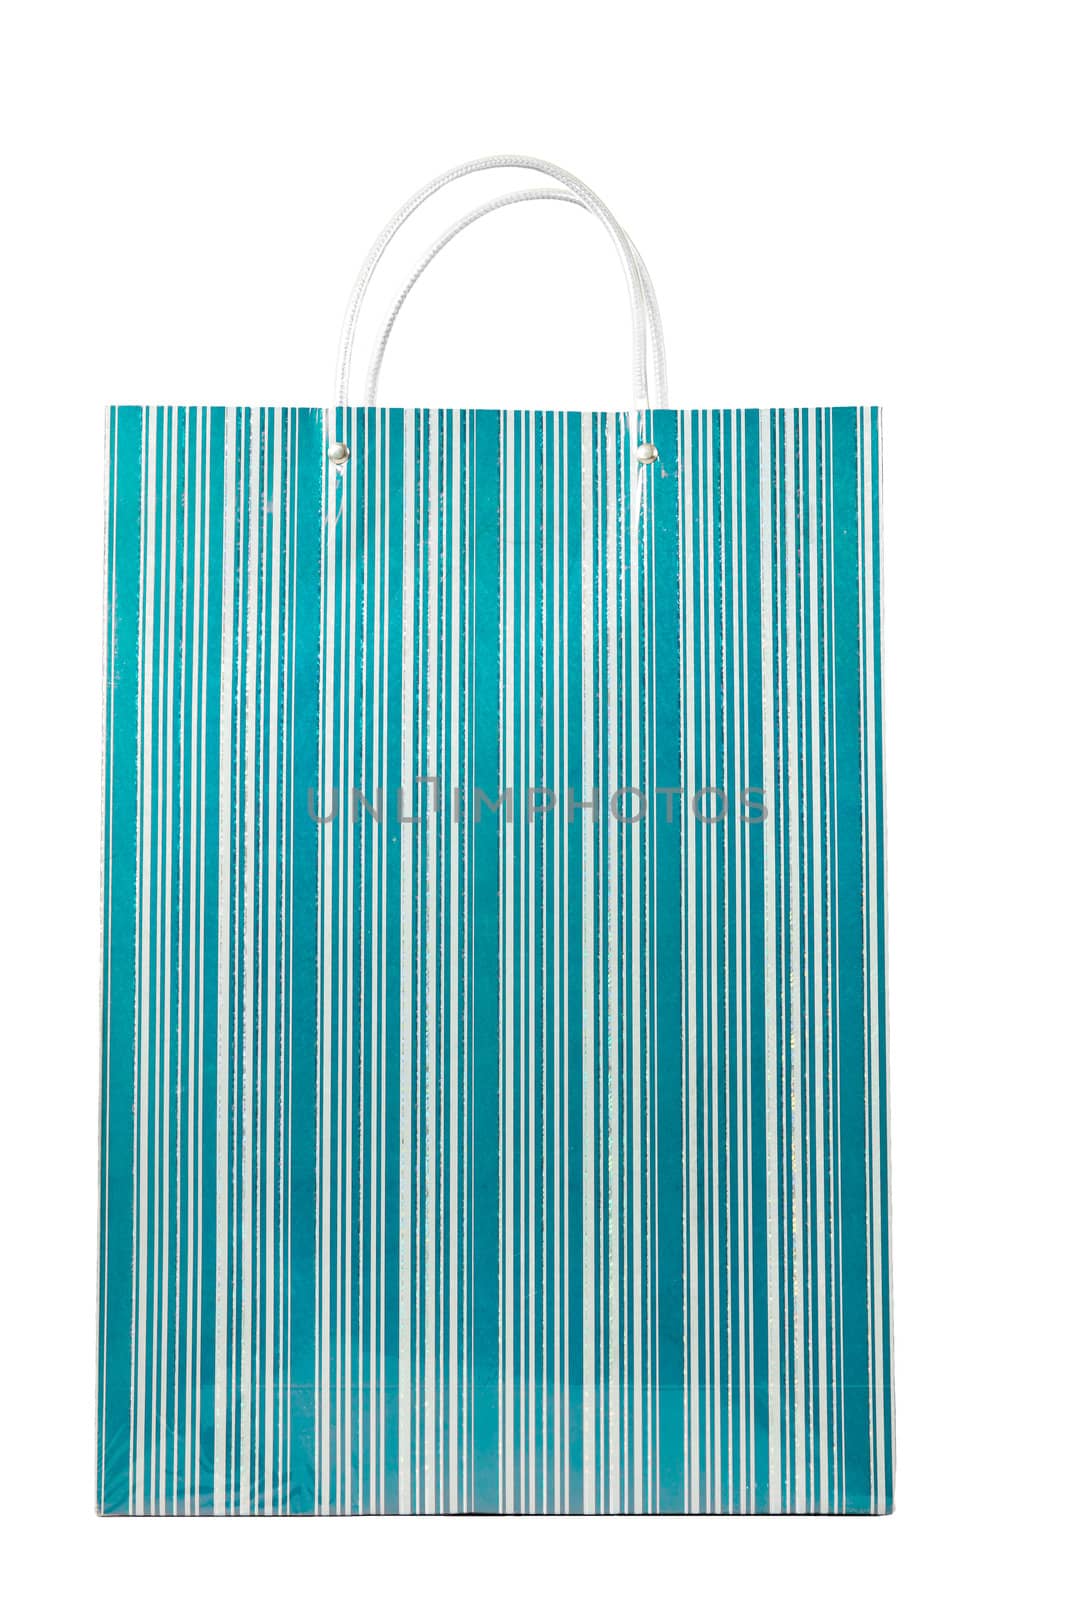 A fancy turquoise striped shopping bag isolated over white.